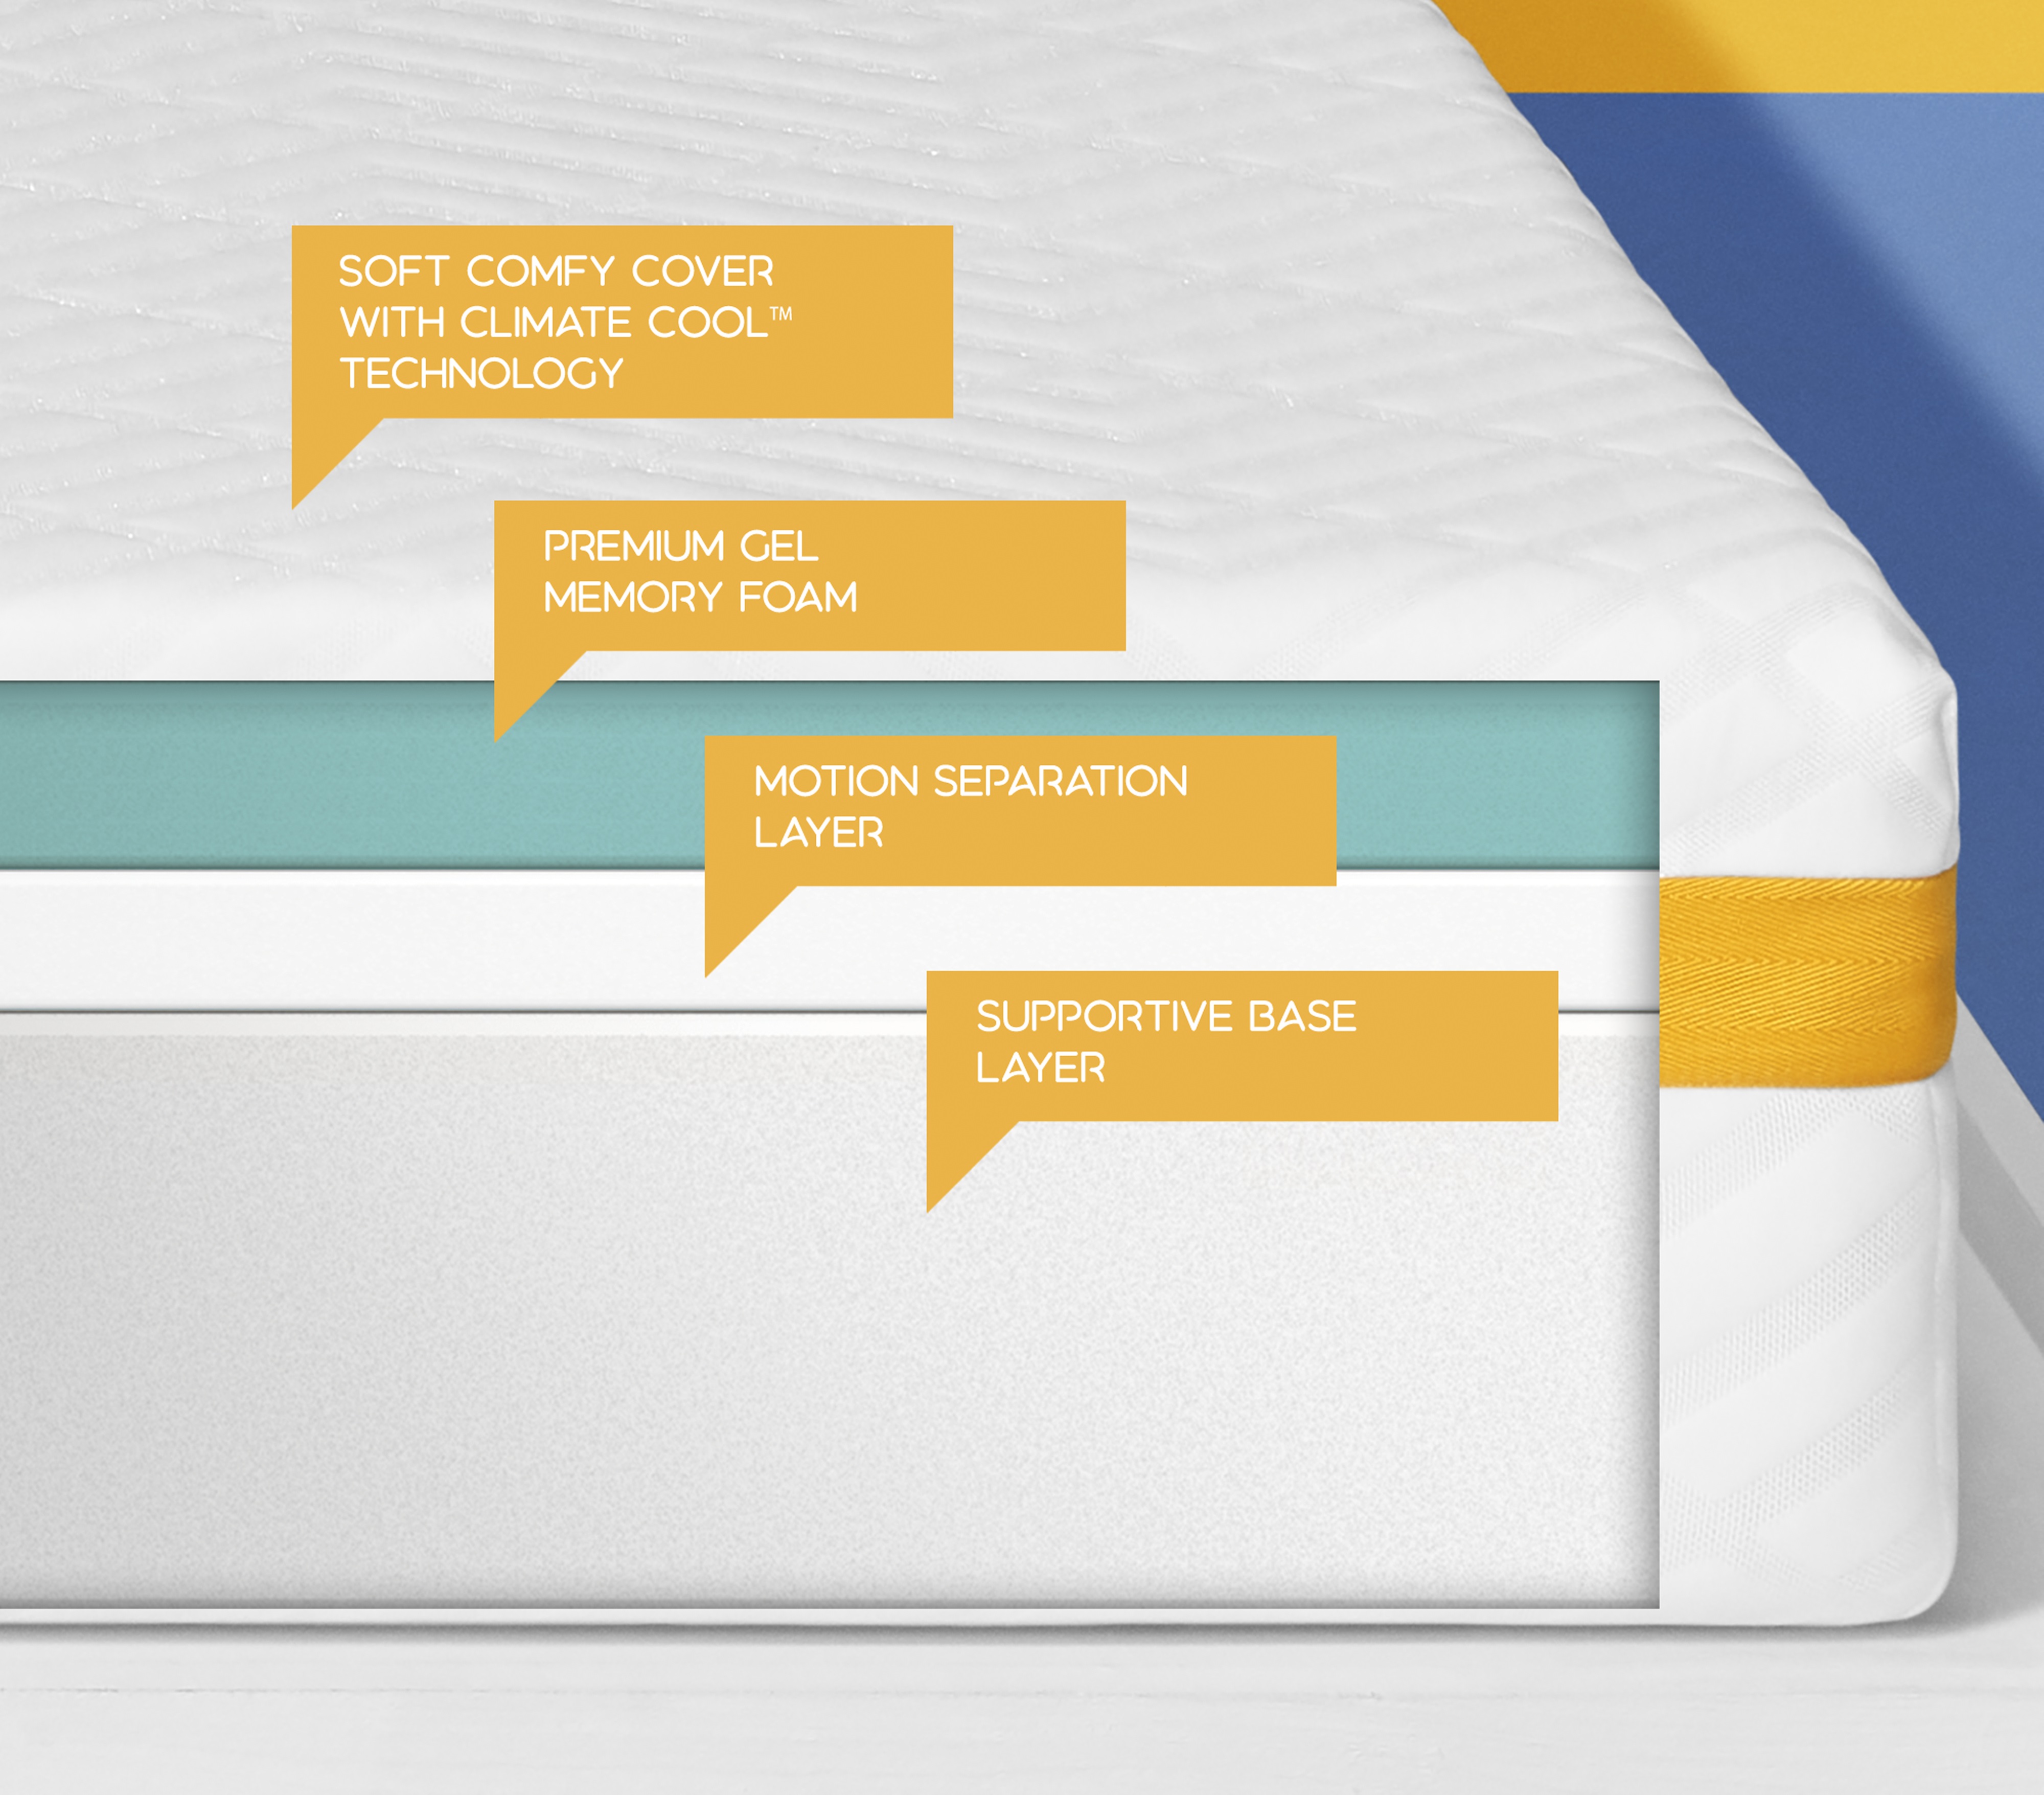 Graphic showing the layers of a memory foam mattress 